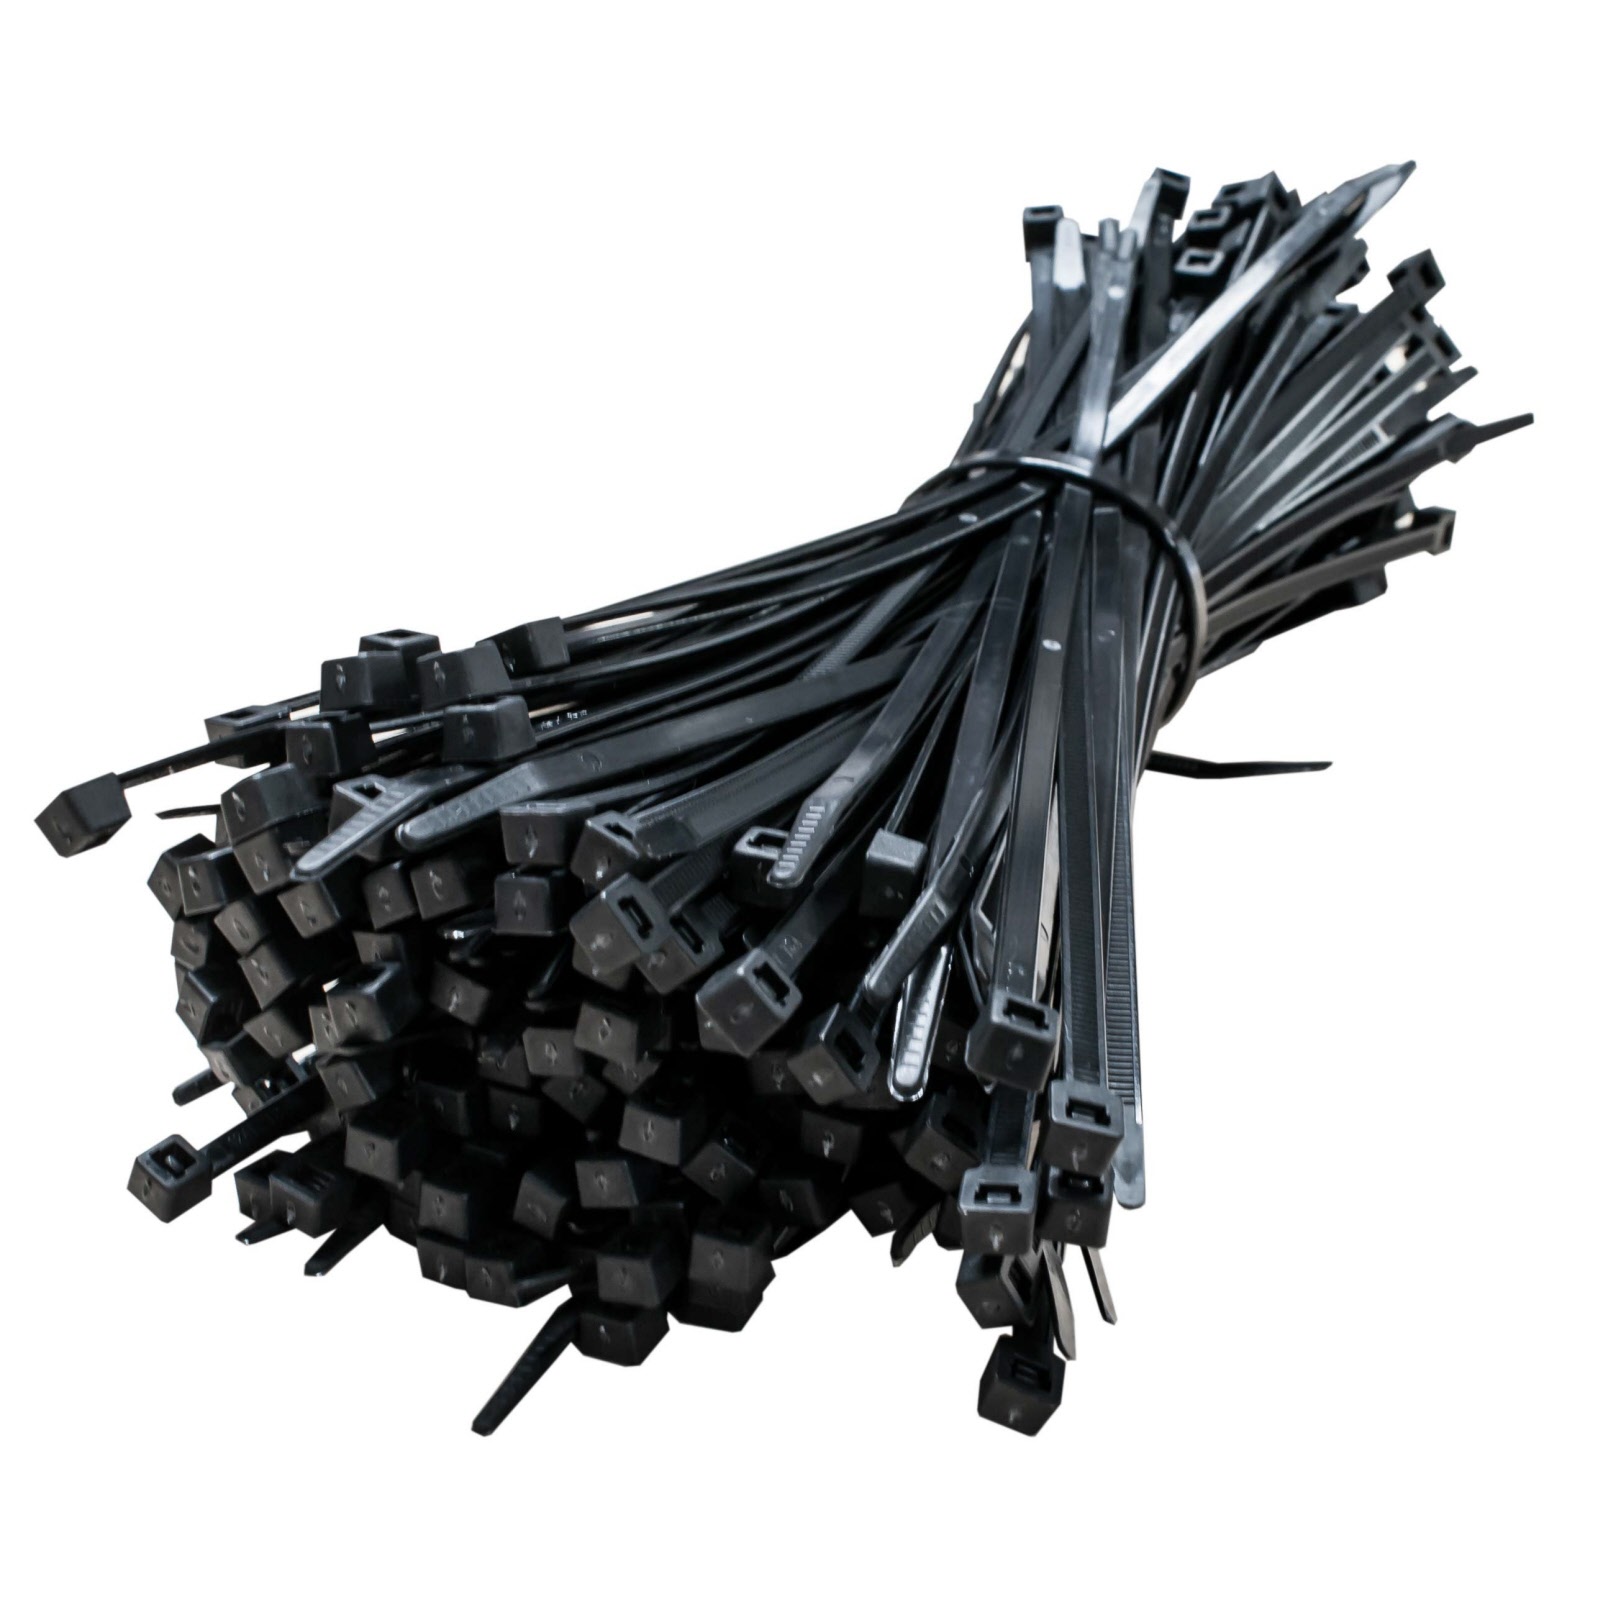 Cable Ties Pack of 100